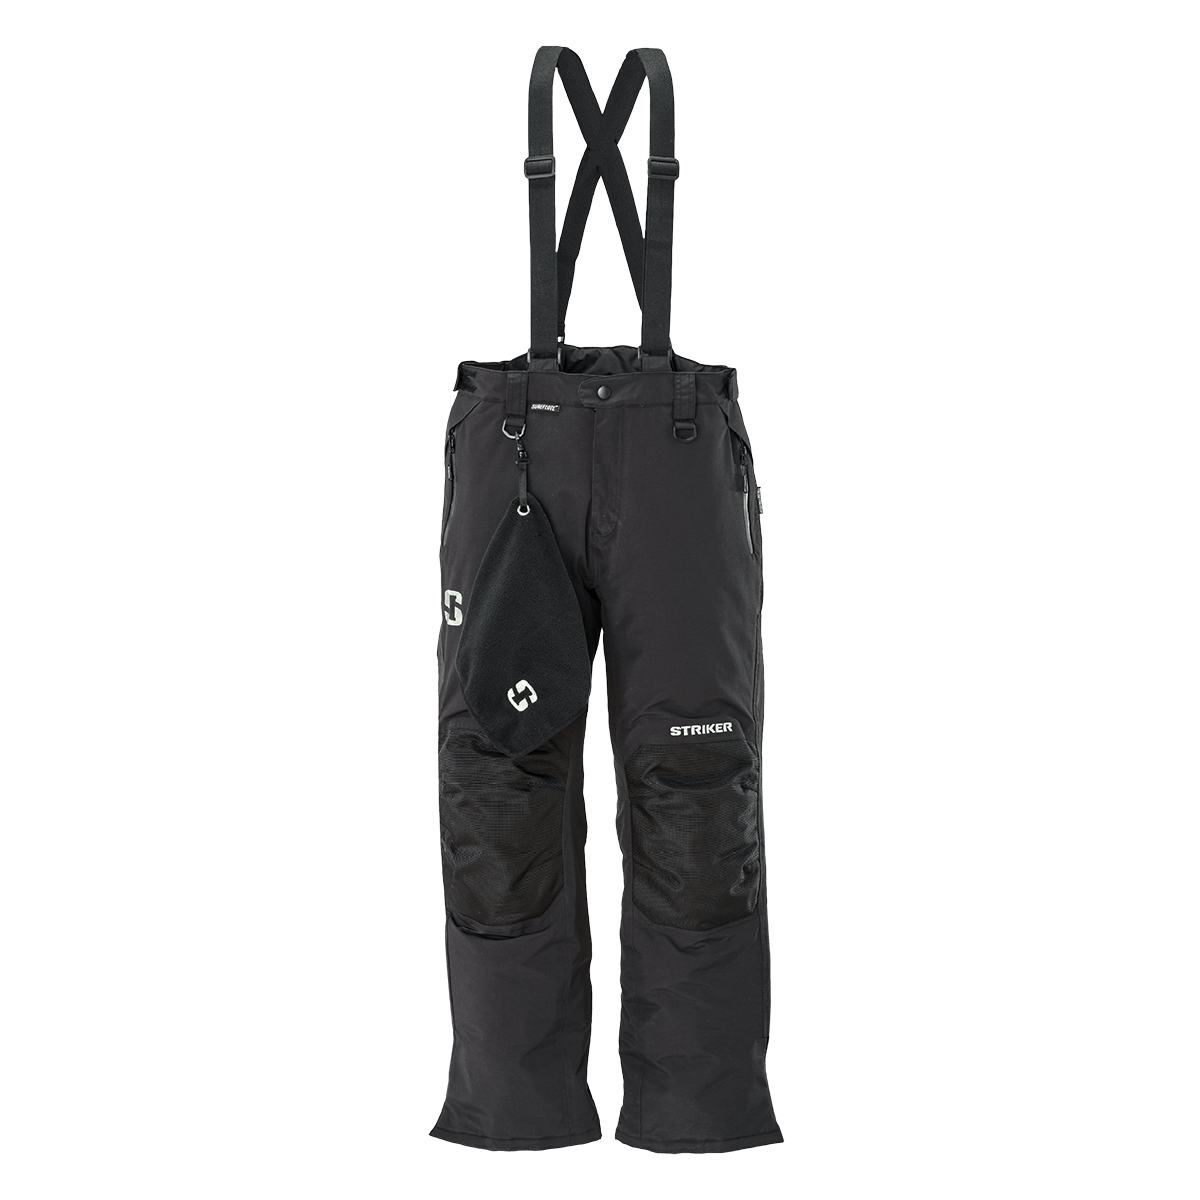 Pure Snow Remarkables Women's Insulated Snow Ski Pant- Raspberry WOMEN'S  Clearance & Sample Sale Mens WOMEN'S Clearance & Sample Sale Womens WOMEN'S  Clearance & Sample Sale Kids WOMEN'S Clearance & Sample Sale